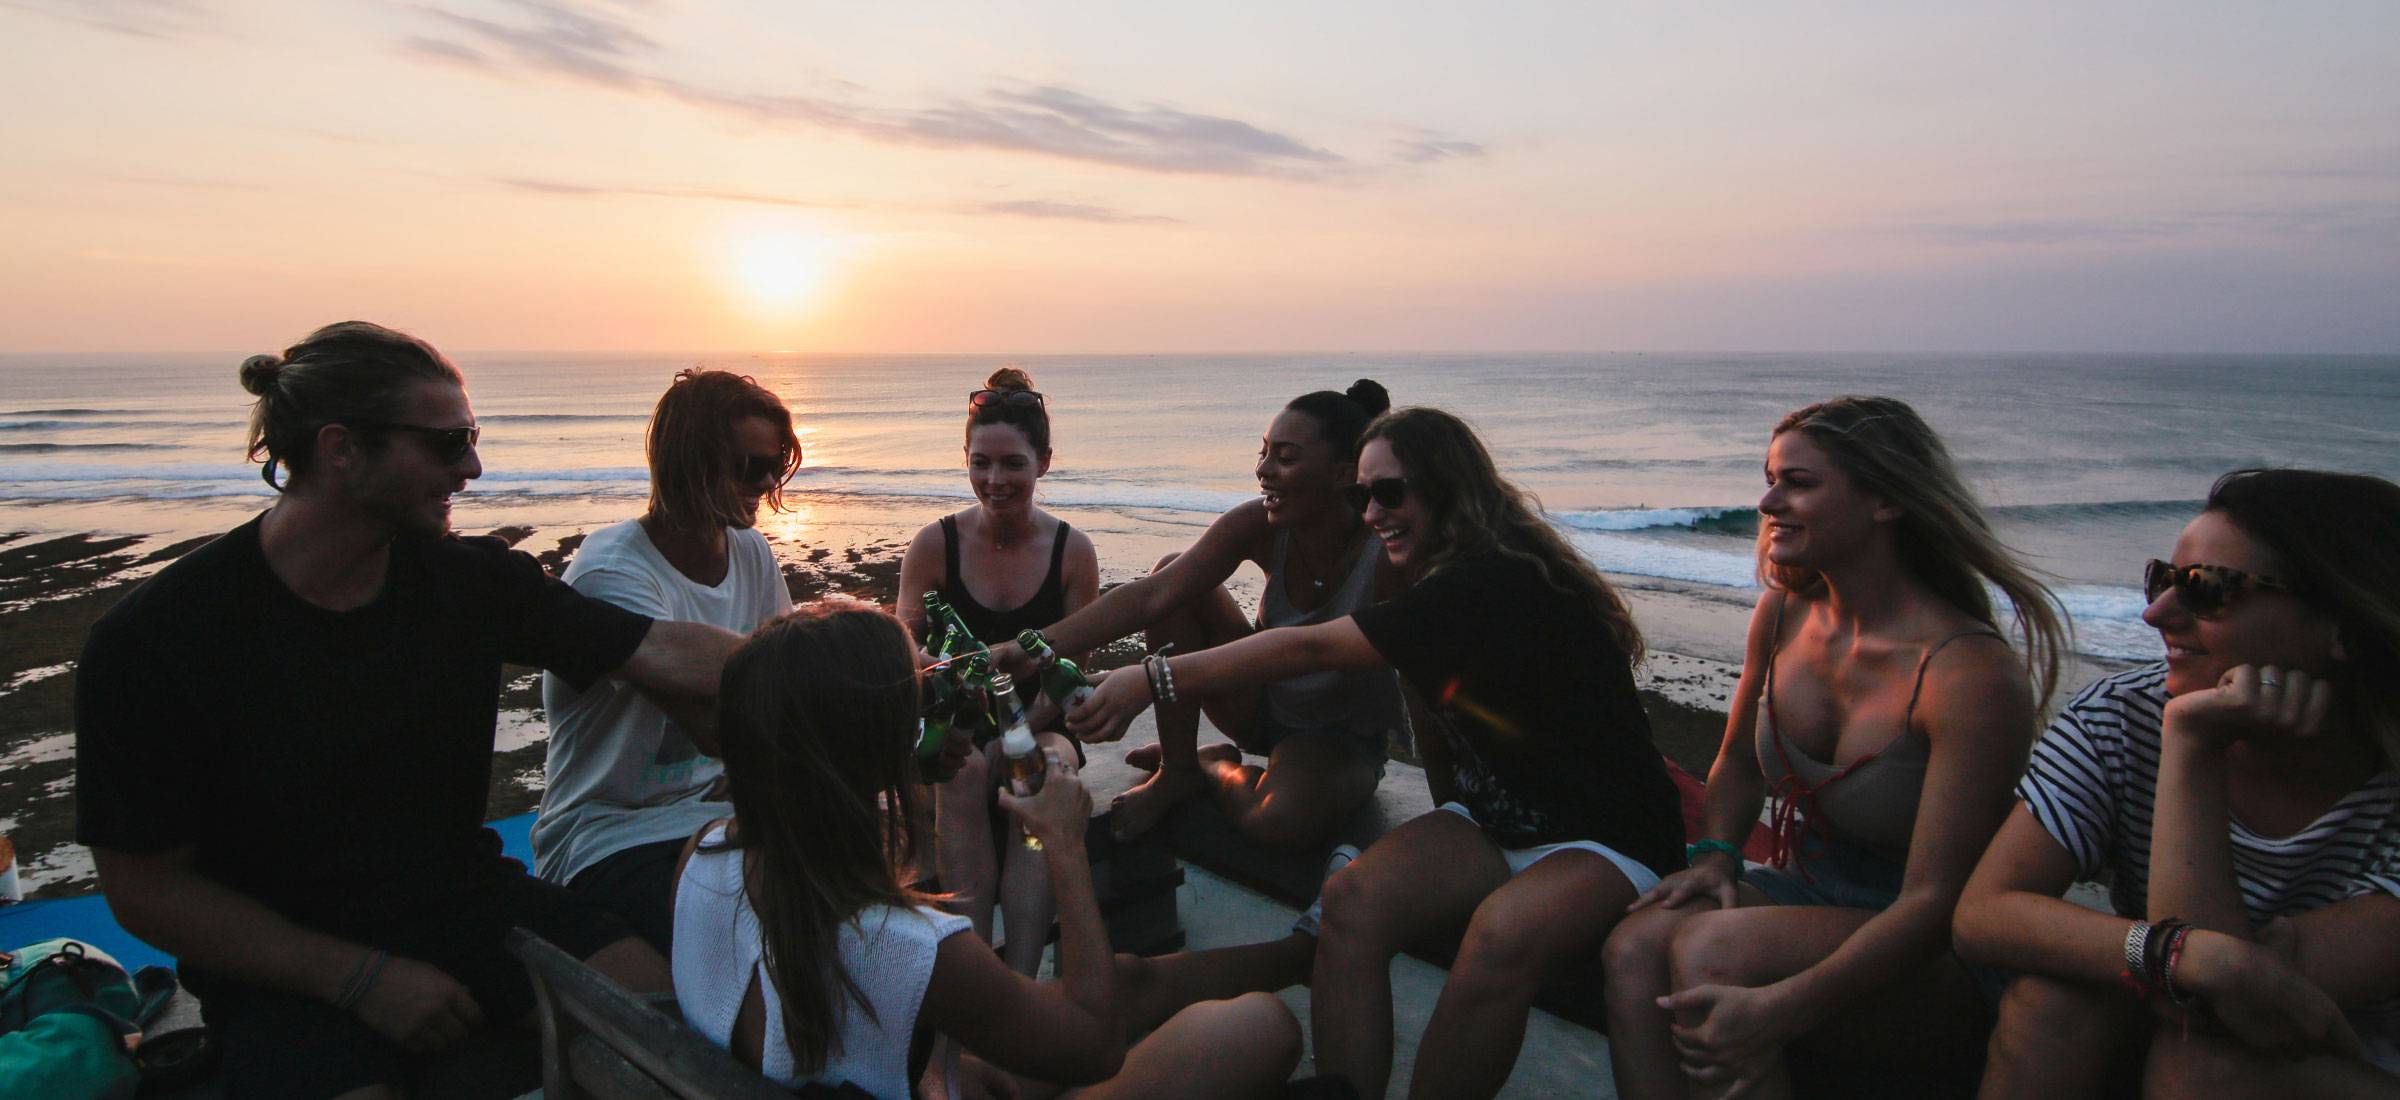 Bali surf group travel experience